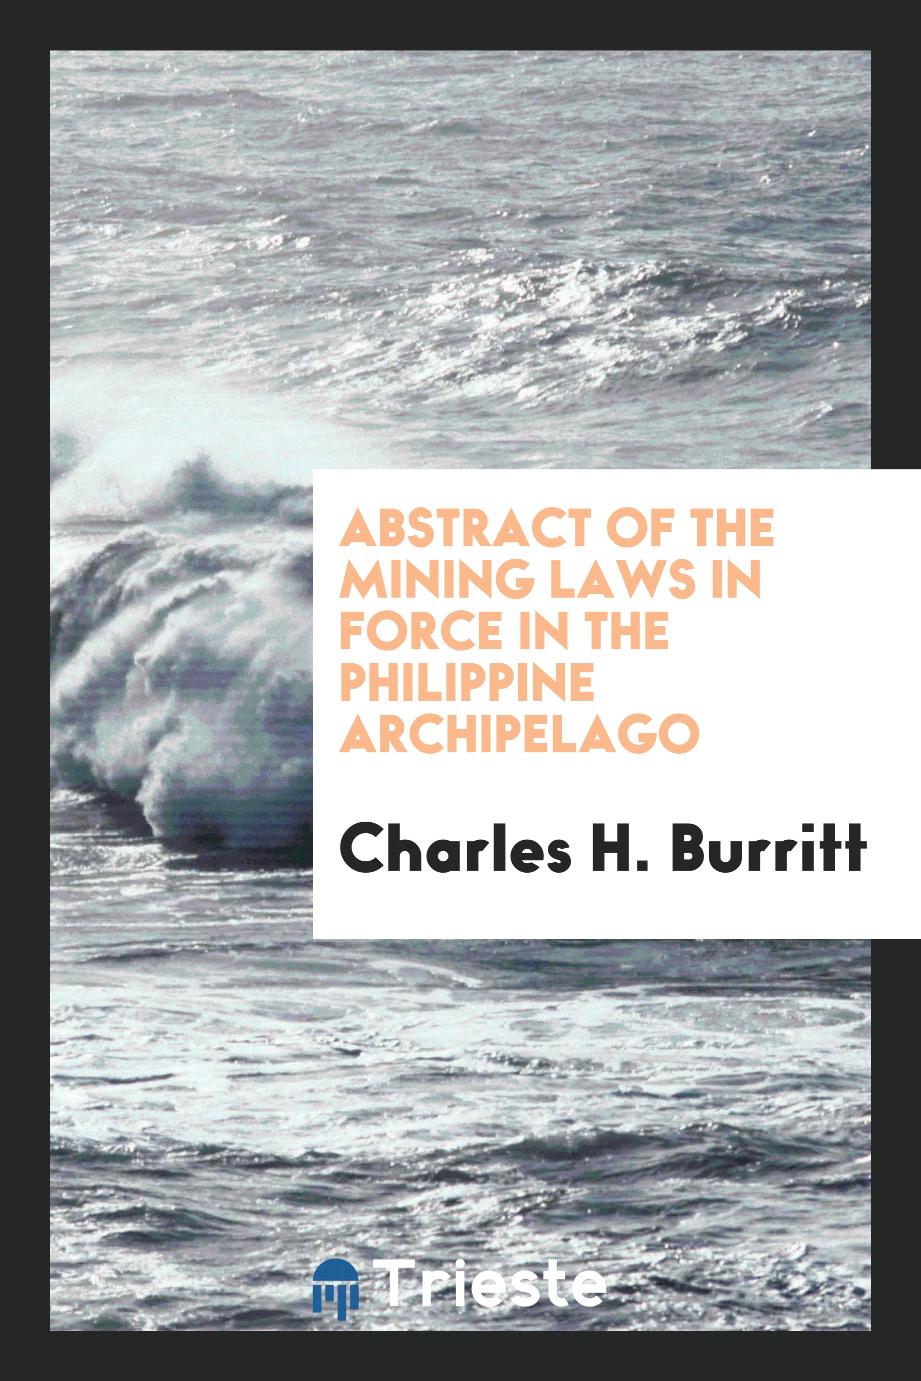 Abstract of the Mining Laws in Force in the Philippine Archipelago